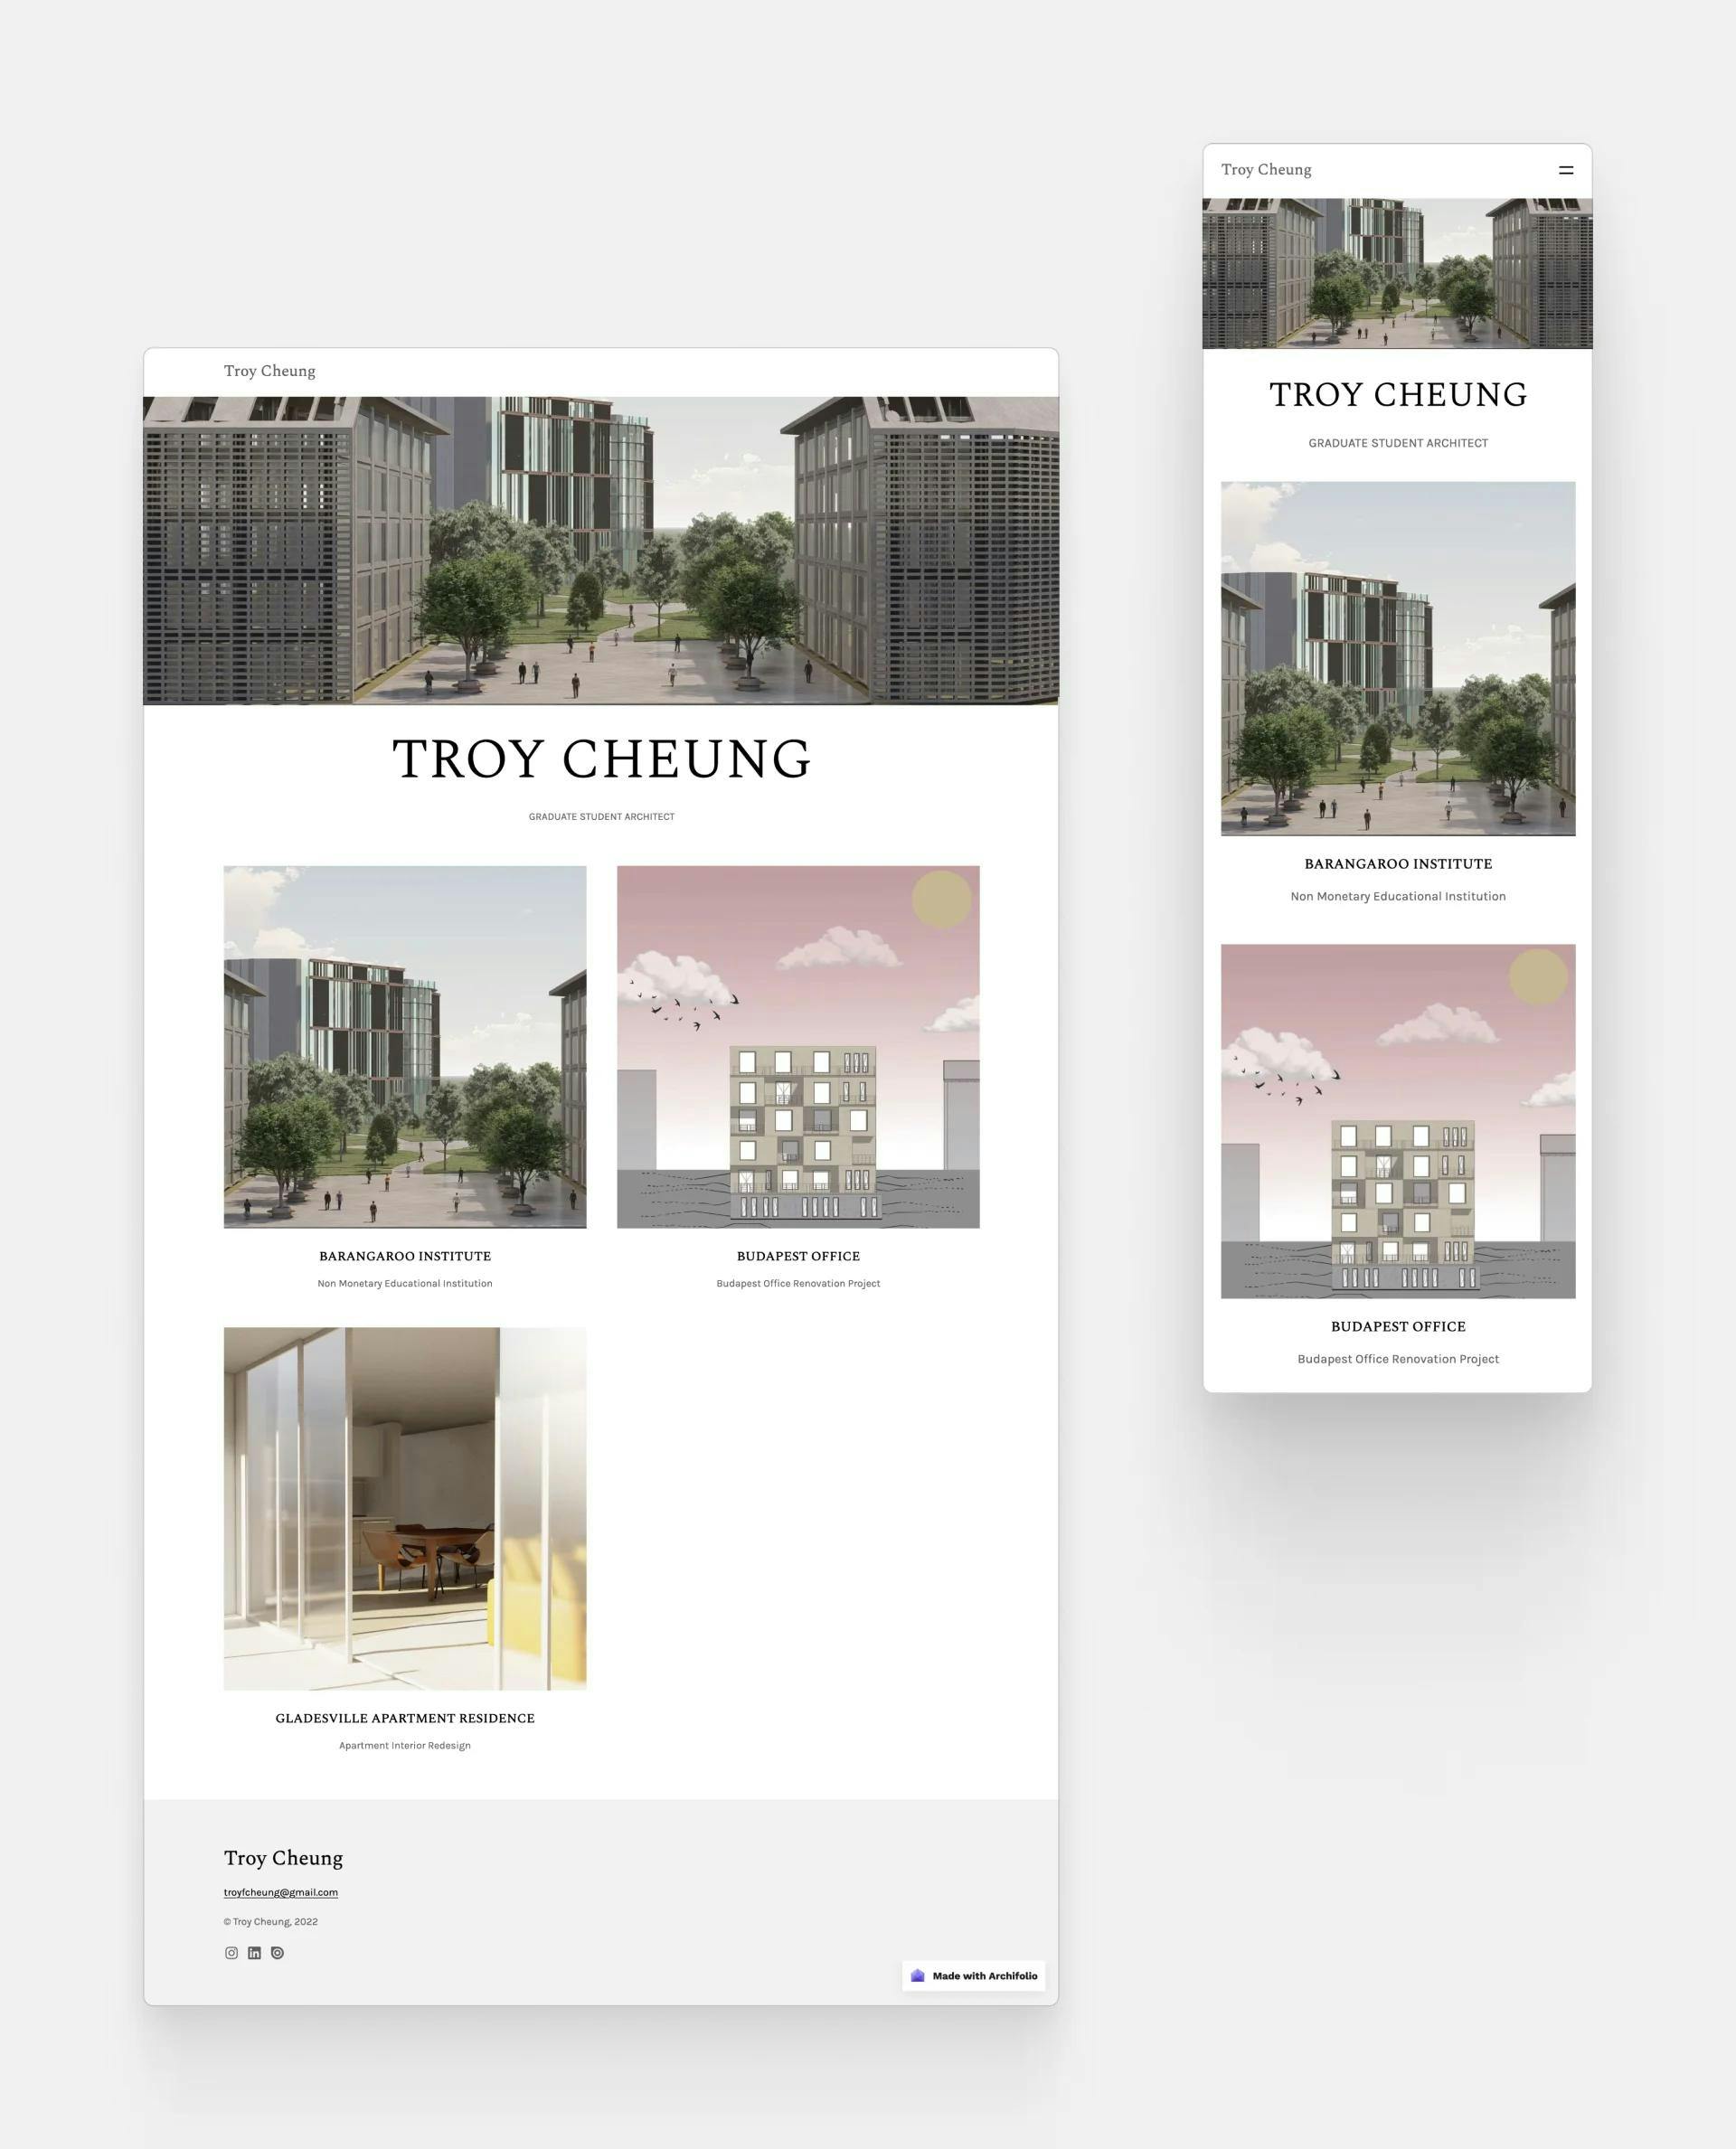 Troy Cheungs's architecture portfolio website with stunning project thumbnails